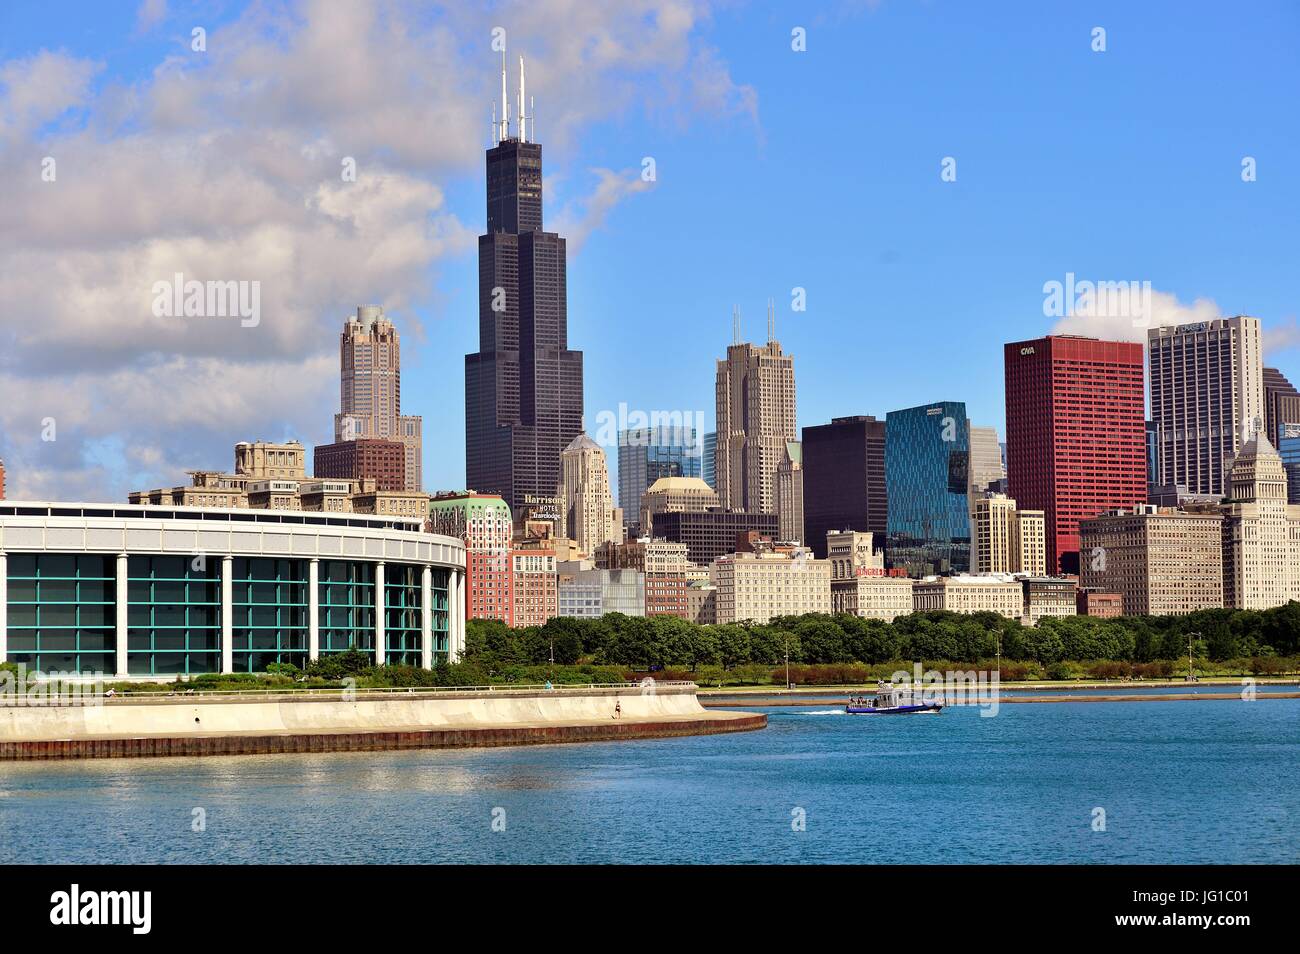 The Chicago lakefront and a portion of the city skyline as seen from the Museum Campus on a warn, late spring morning. Chicago, Illinois, USA. Stock Photo